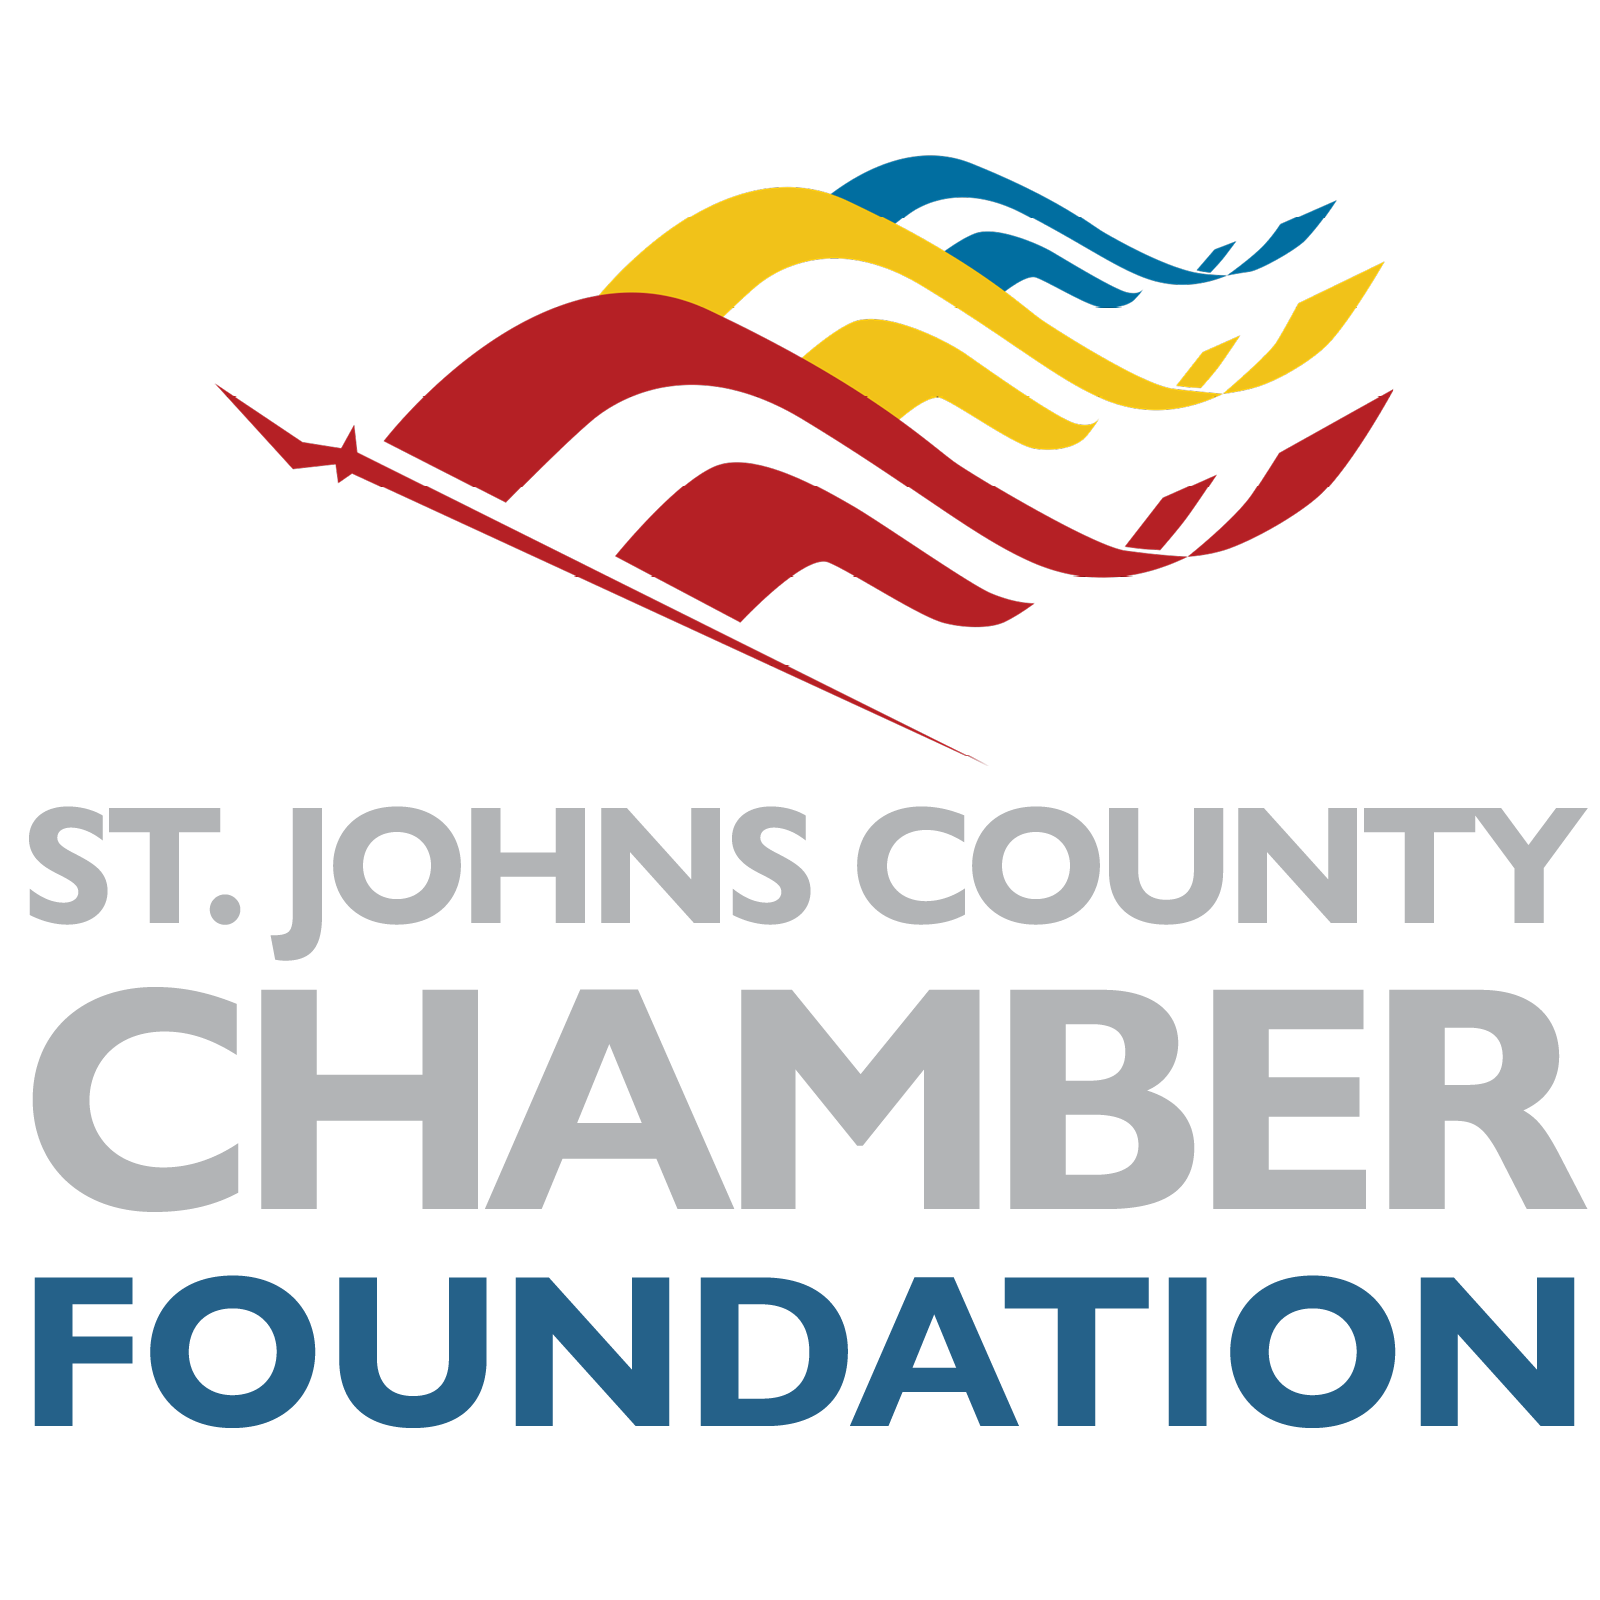 St. Johns County Chamber of Commerce establishes foundation to better serve the community